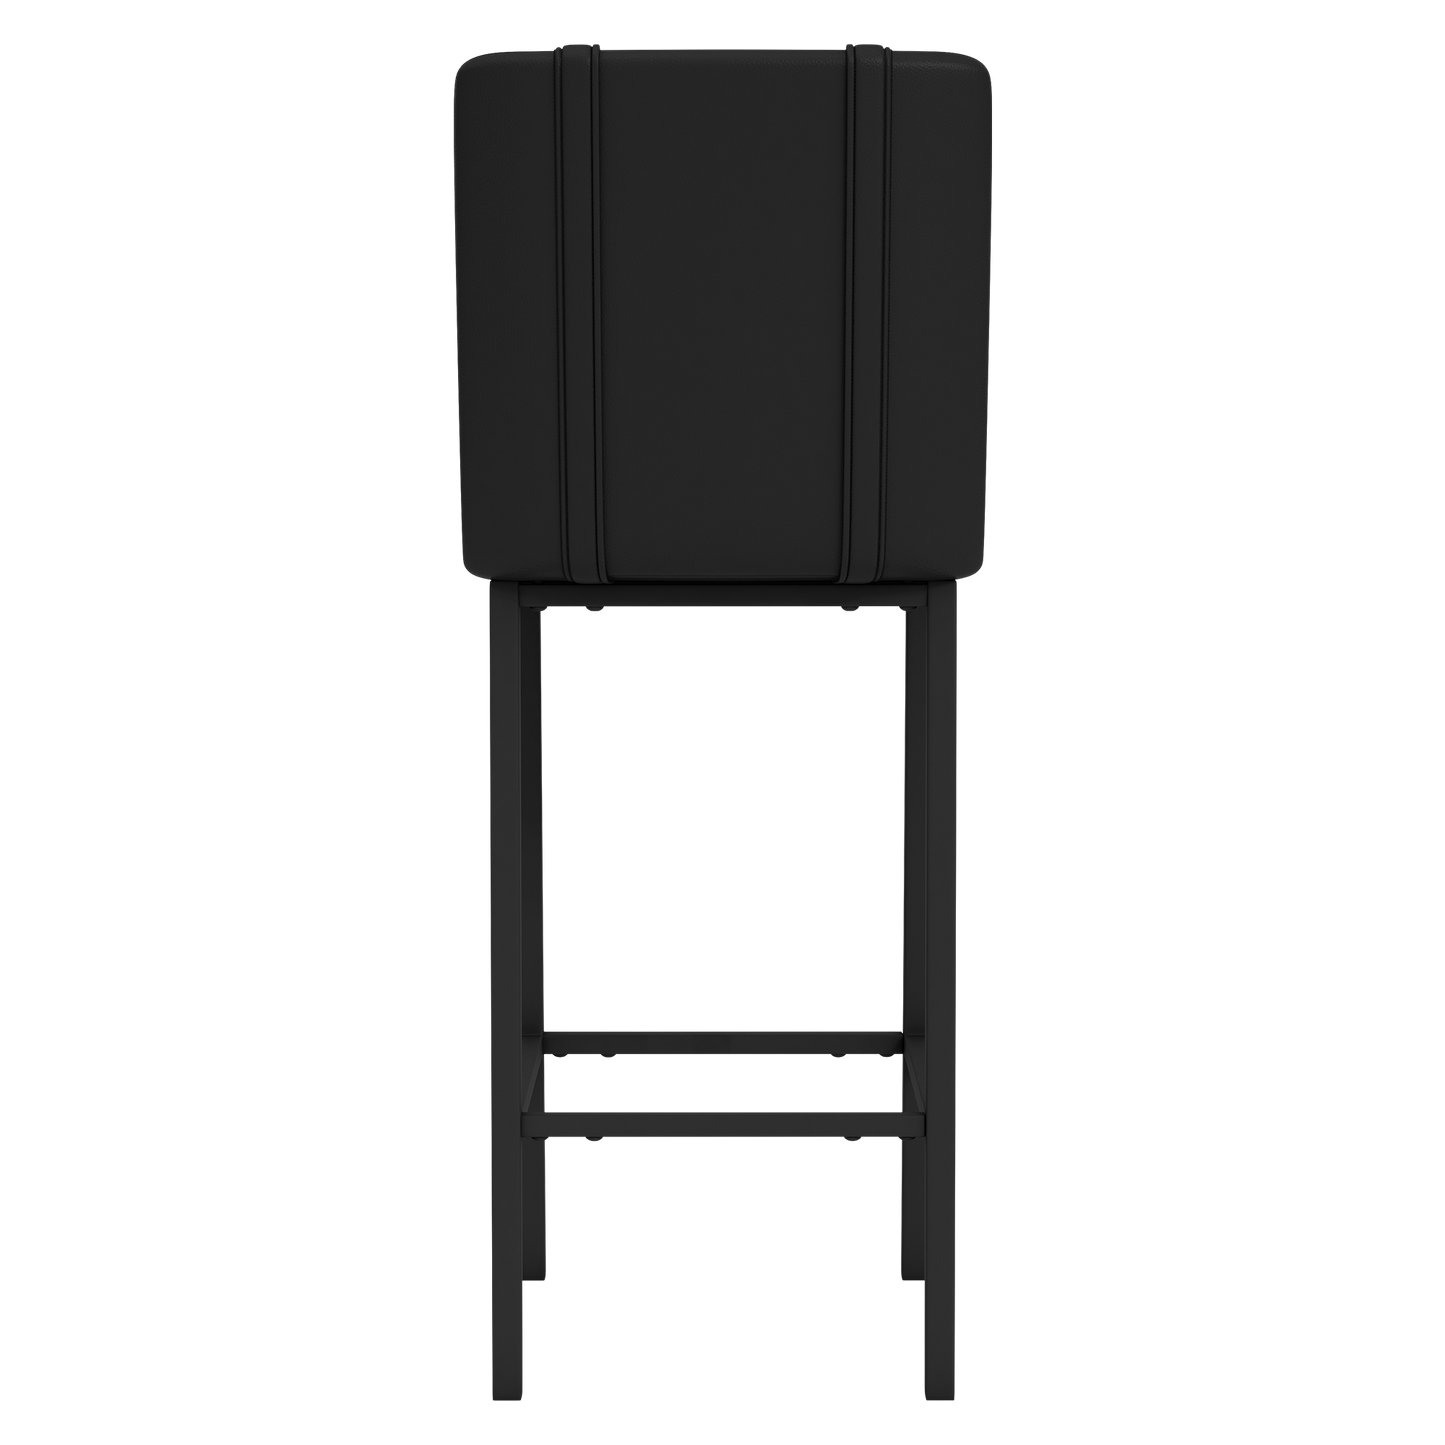 Bar Stool 500 with Philadelphia 76ers GC [CAN ONLY BE SHIPPED TO PENNSYLVANIA] Set of 2